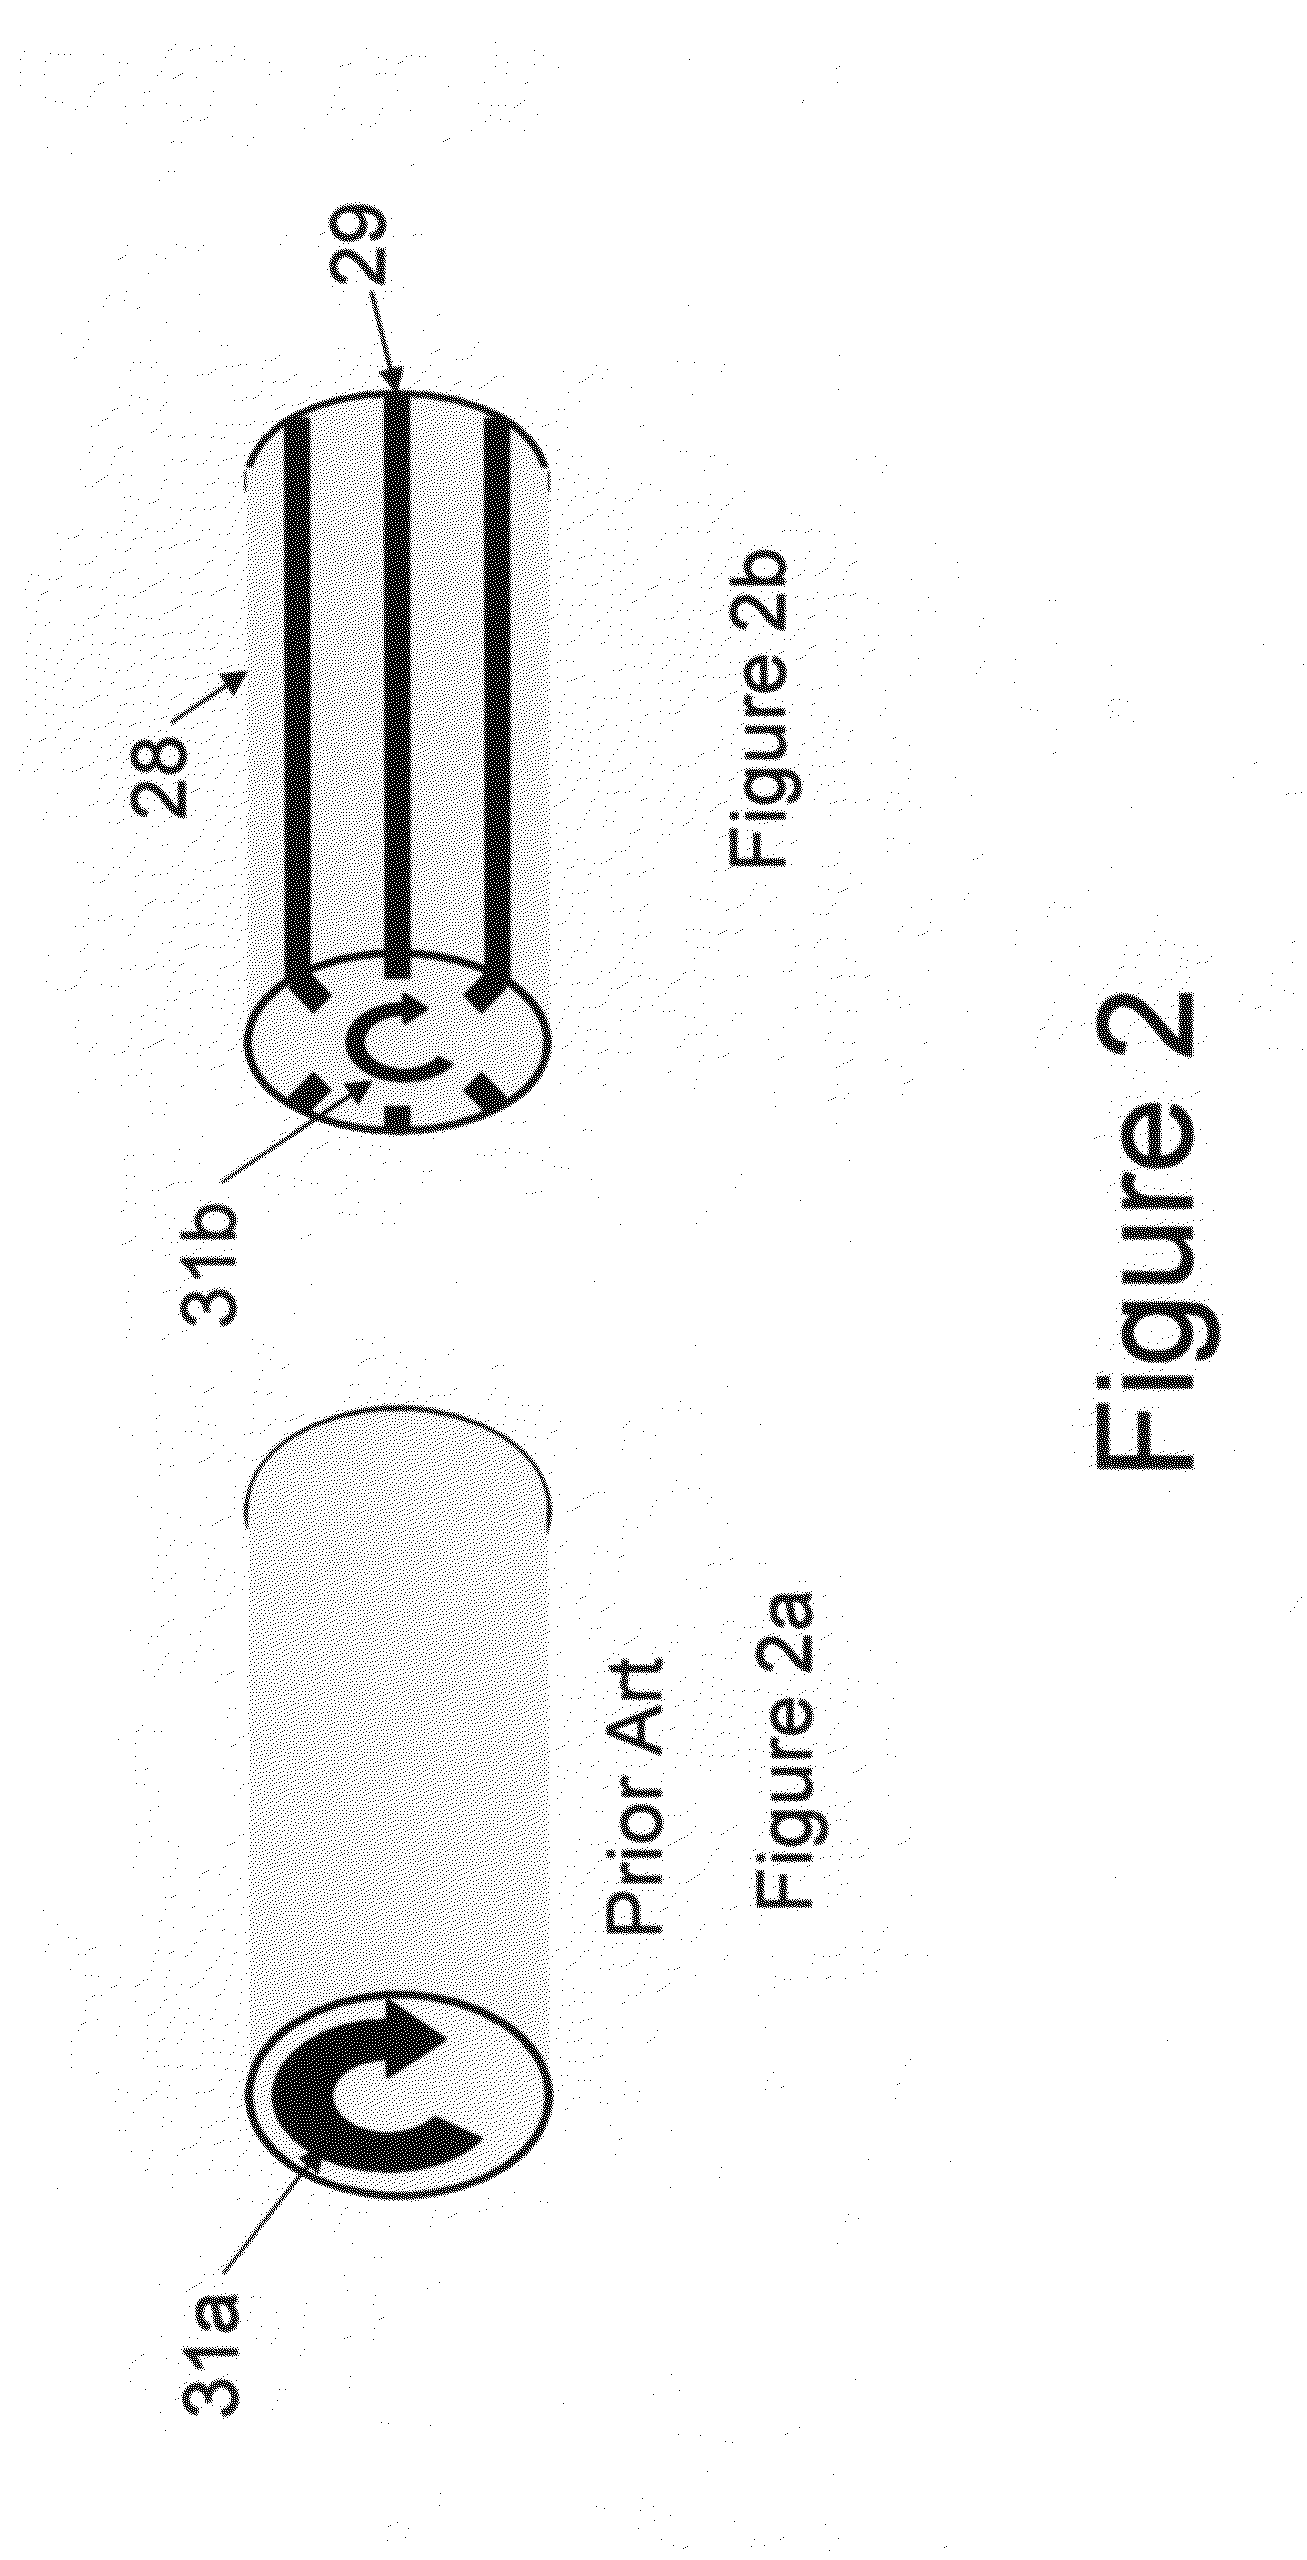 Electromagnetic device, method and apparatus for selective application to vertebrates